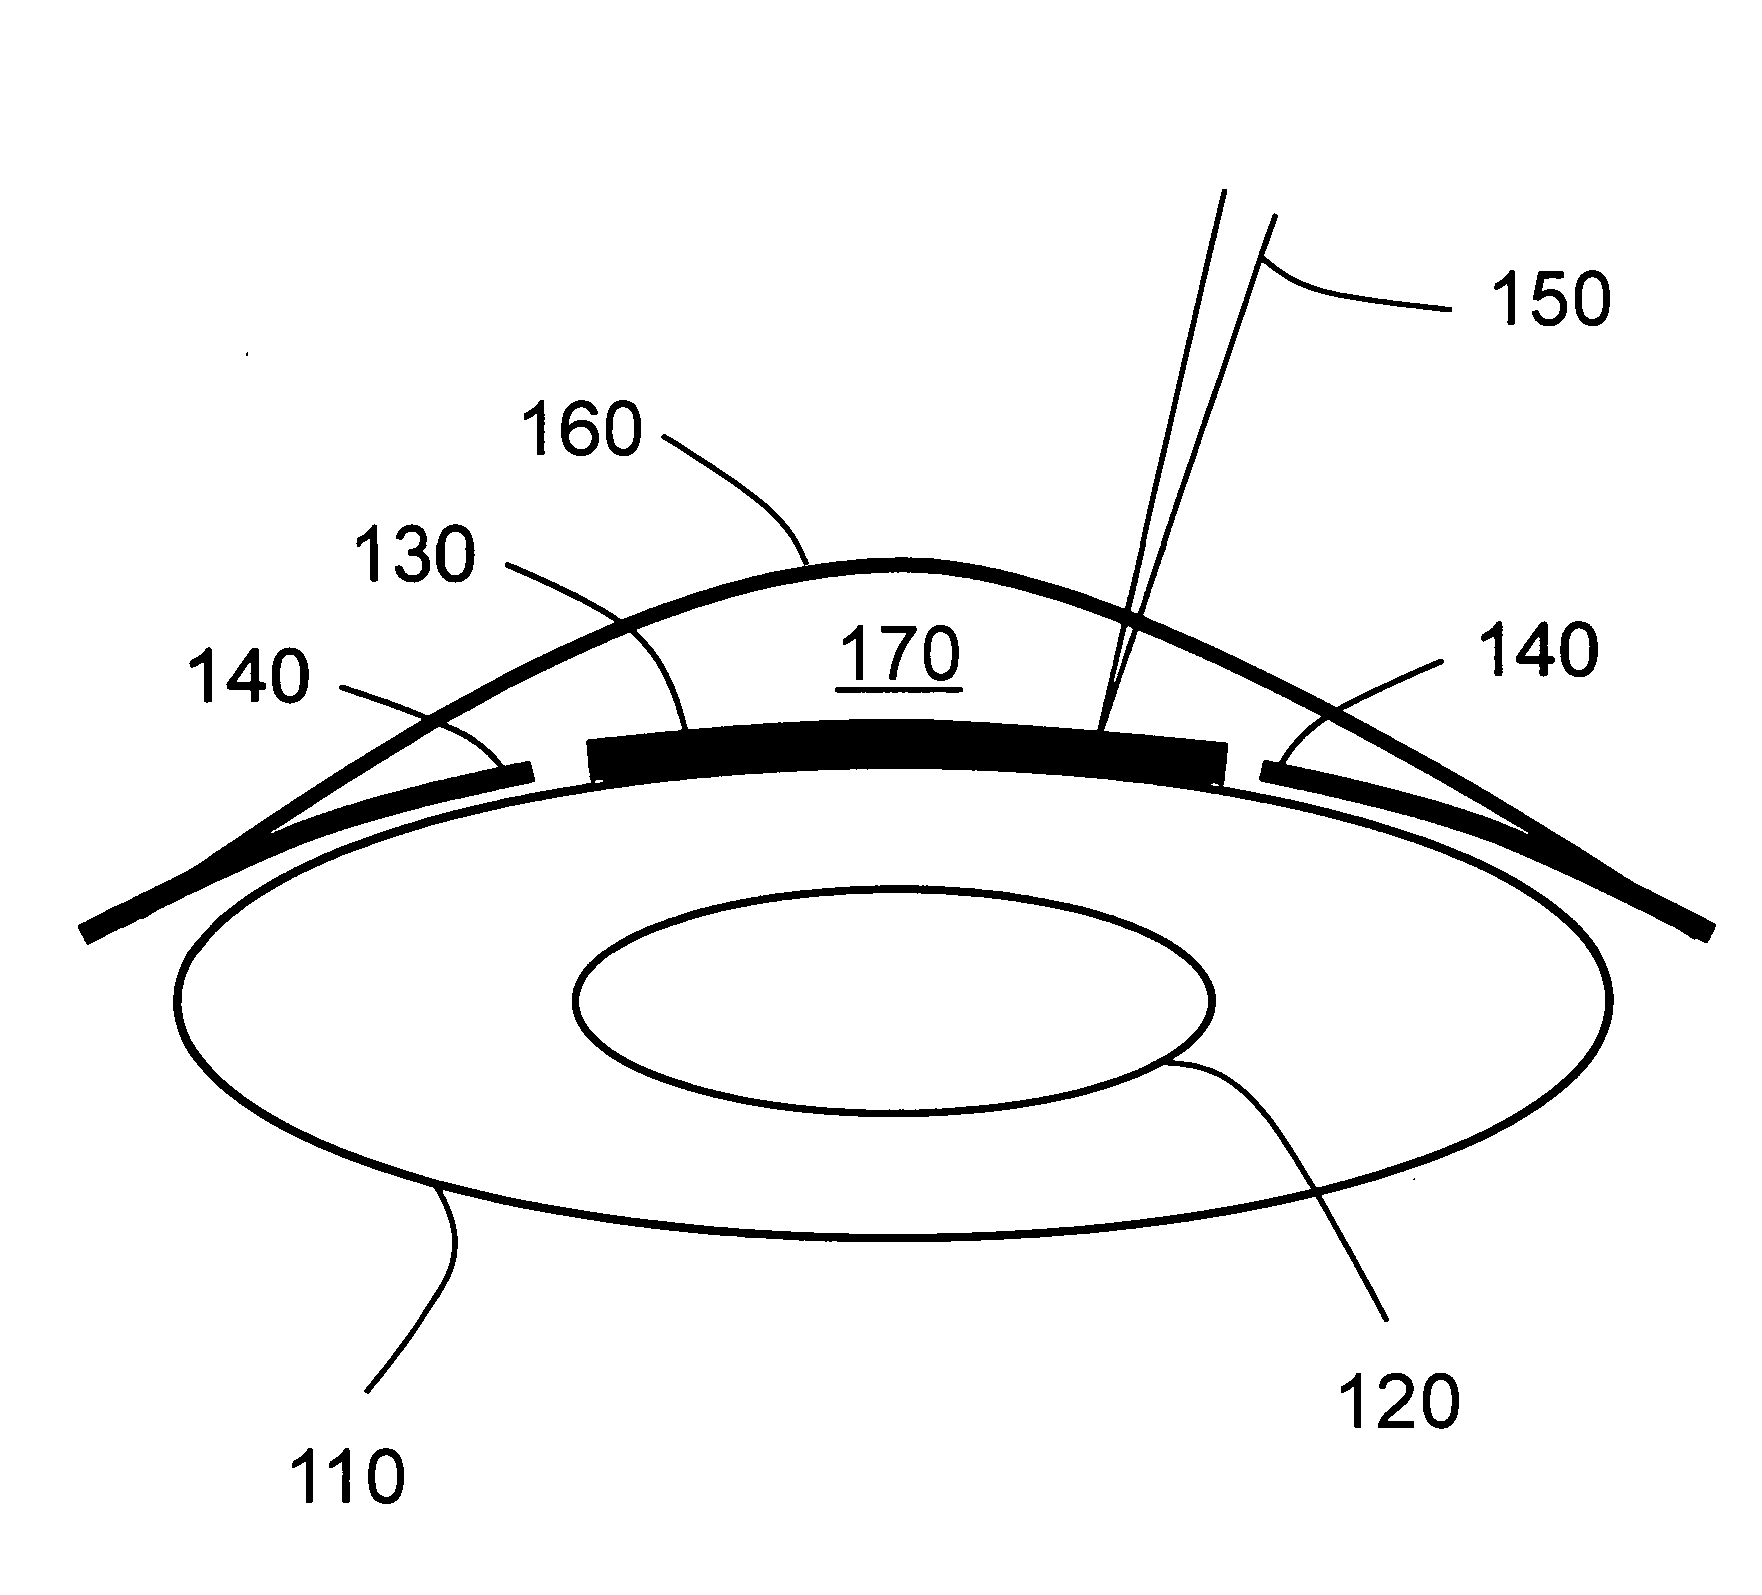 Laser-assisted thermal separation of tissue